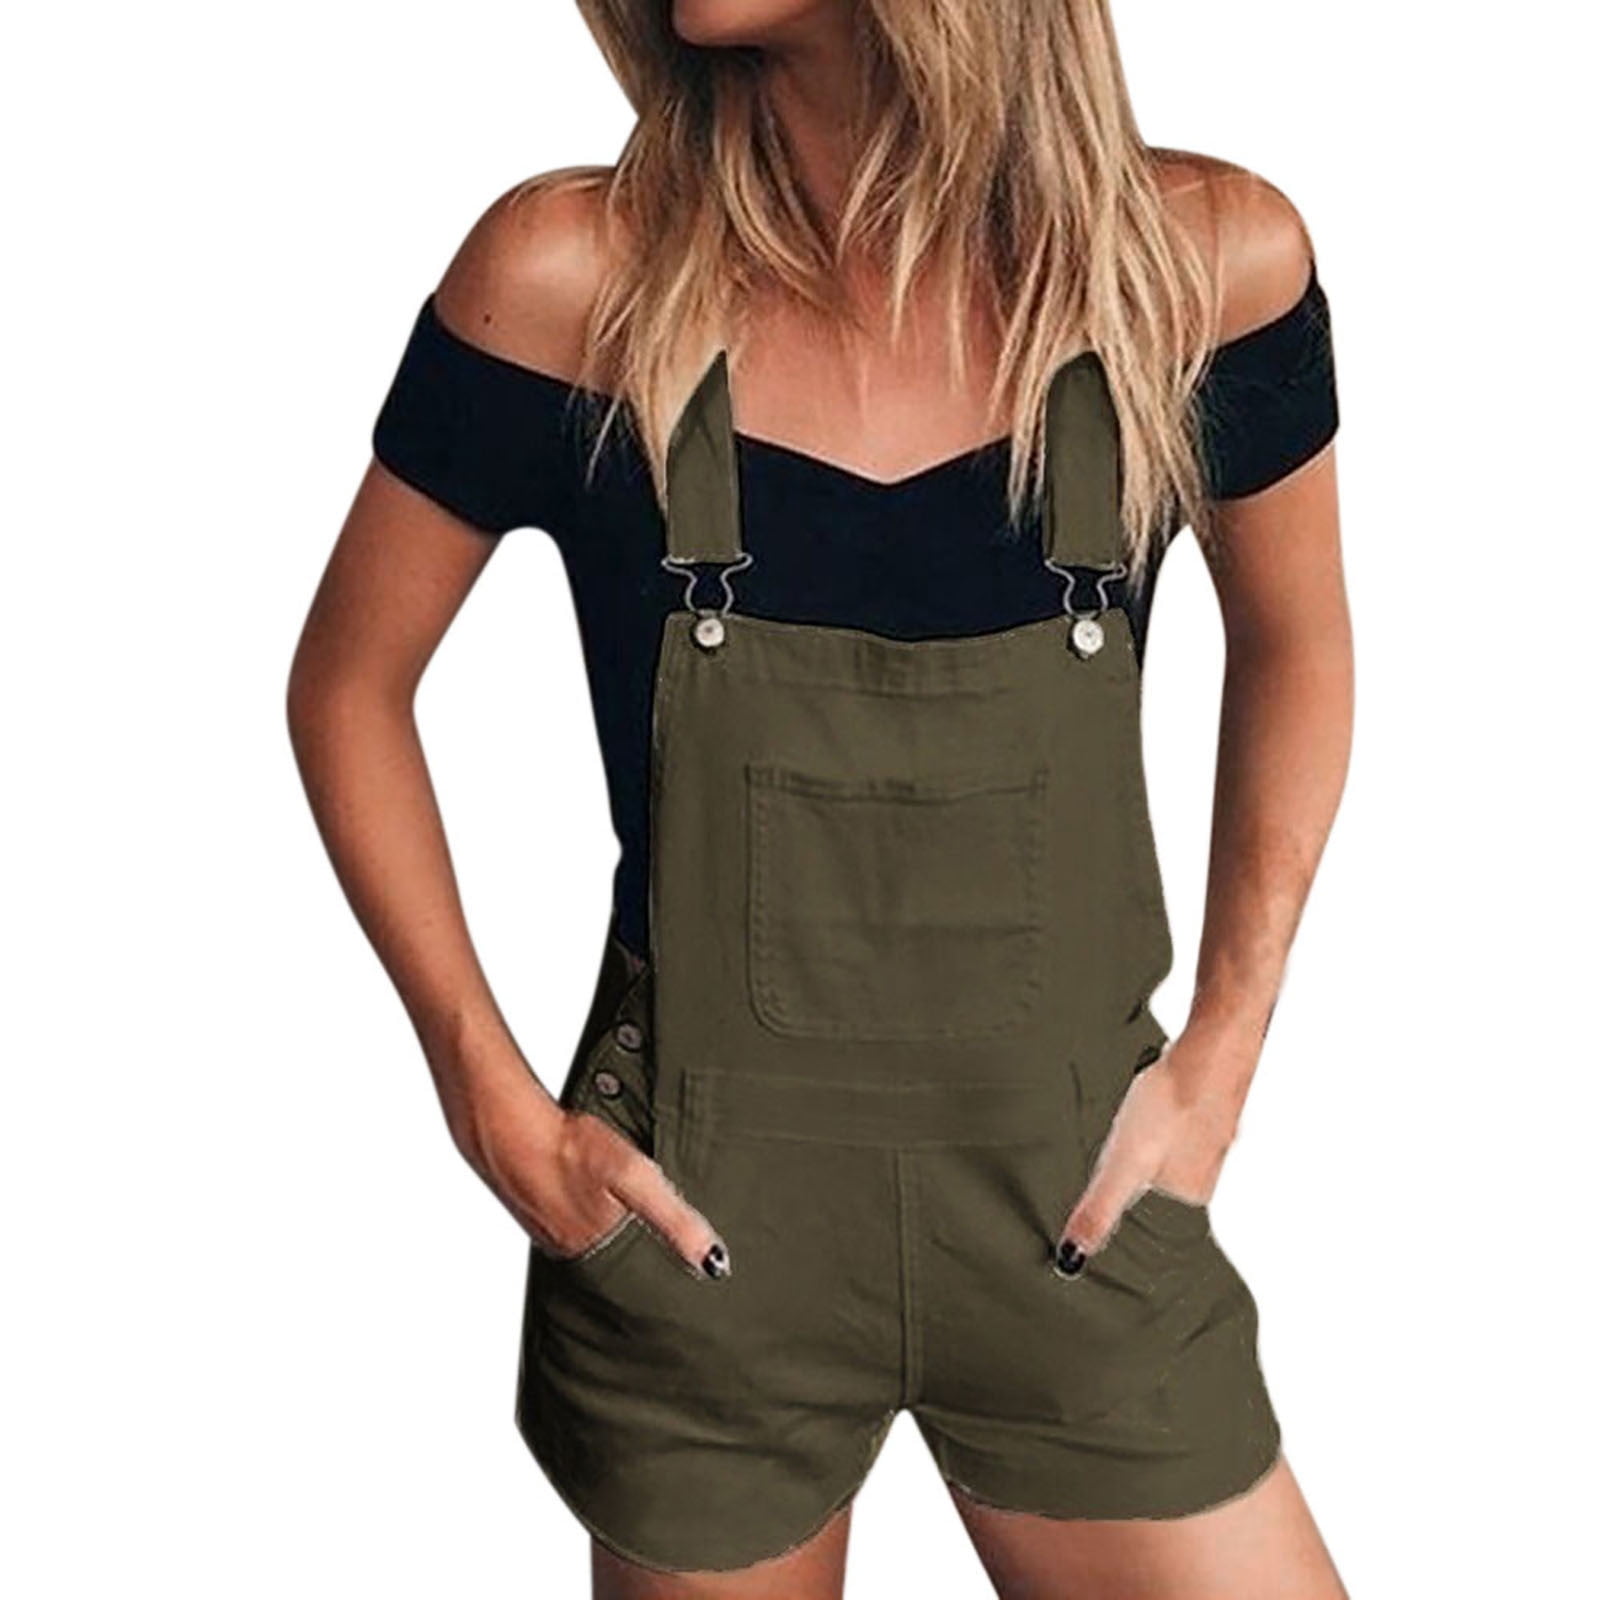  Women's Adjustable Strap Denim Overalls Vintage Ripped Bib  Jumpsuit Summer Regular Fit Stretchy Jean Pants with Pockets : Clothing,  Shoes & Jewelry